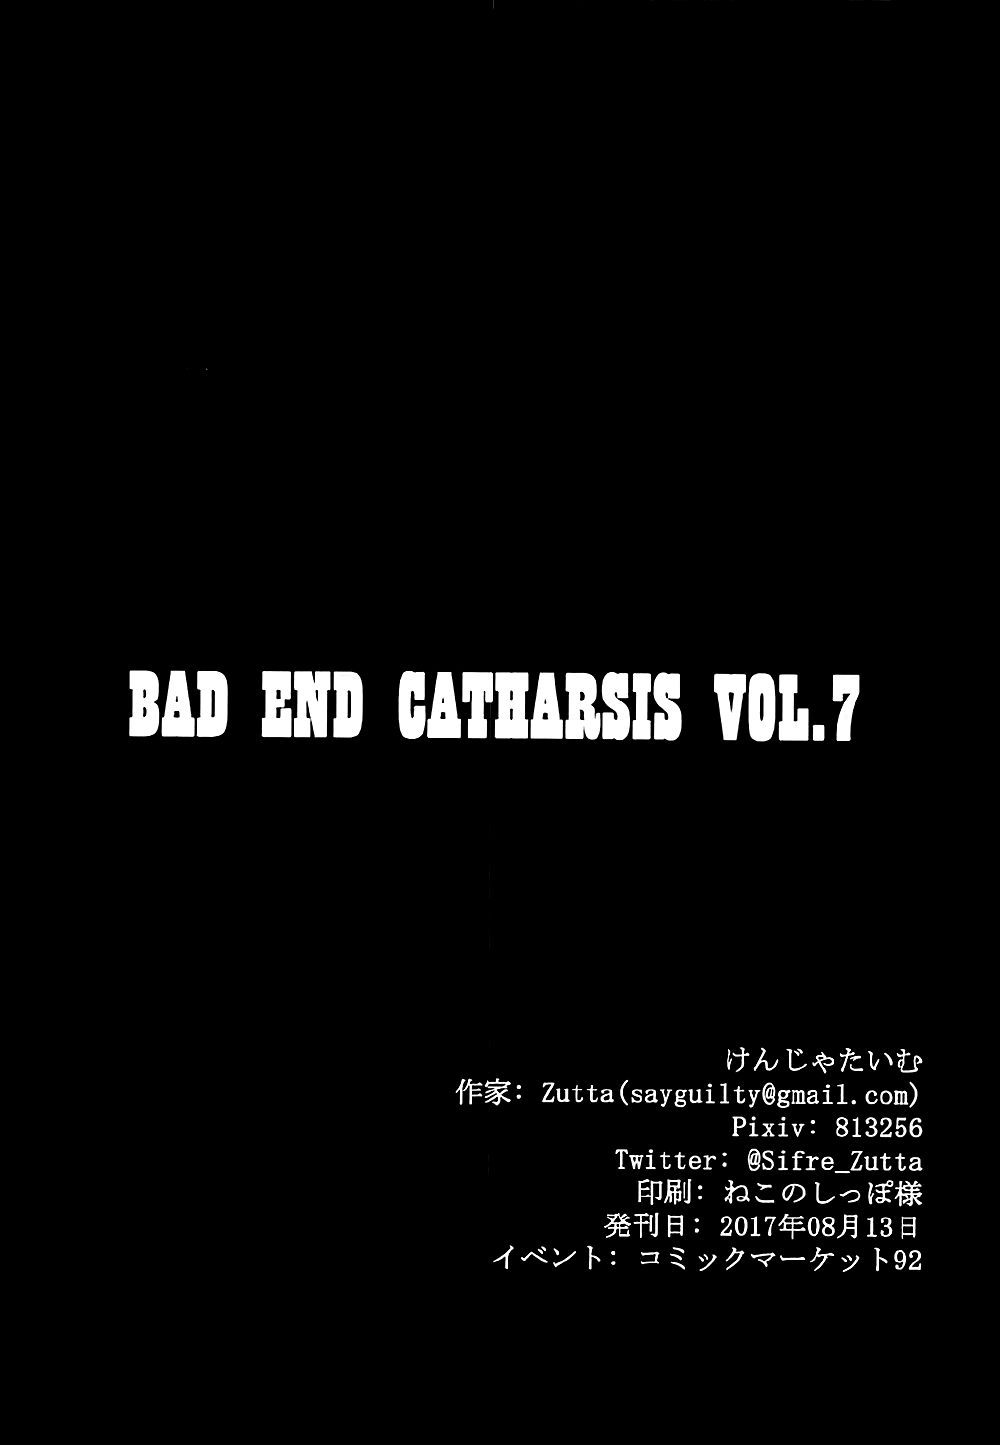 (C92) [けんじゃたいむ (Zutta)] Bad End Catharsis Vol.7 (Fate/Grand Order) [英訳]